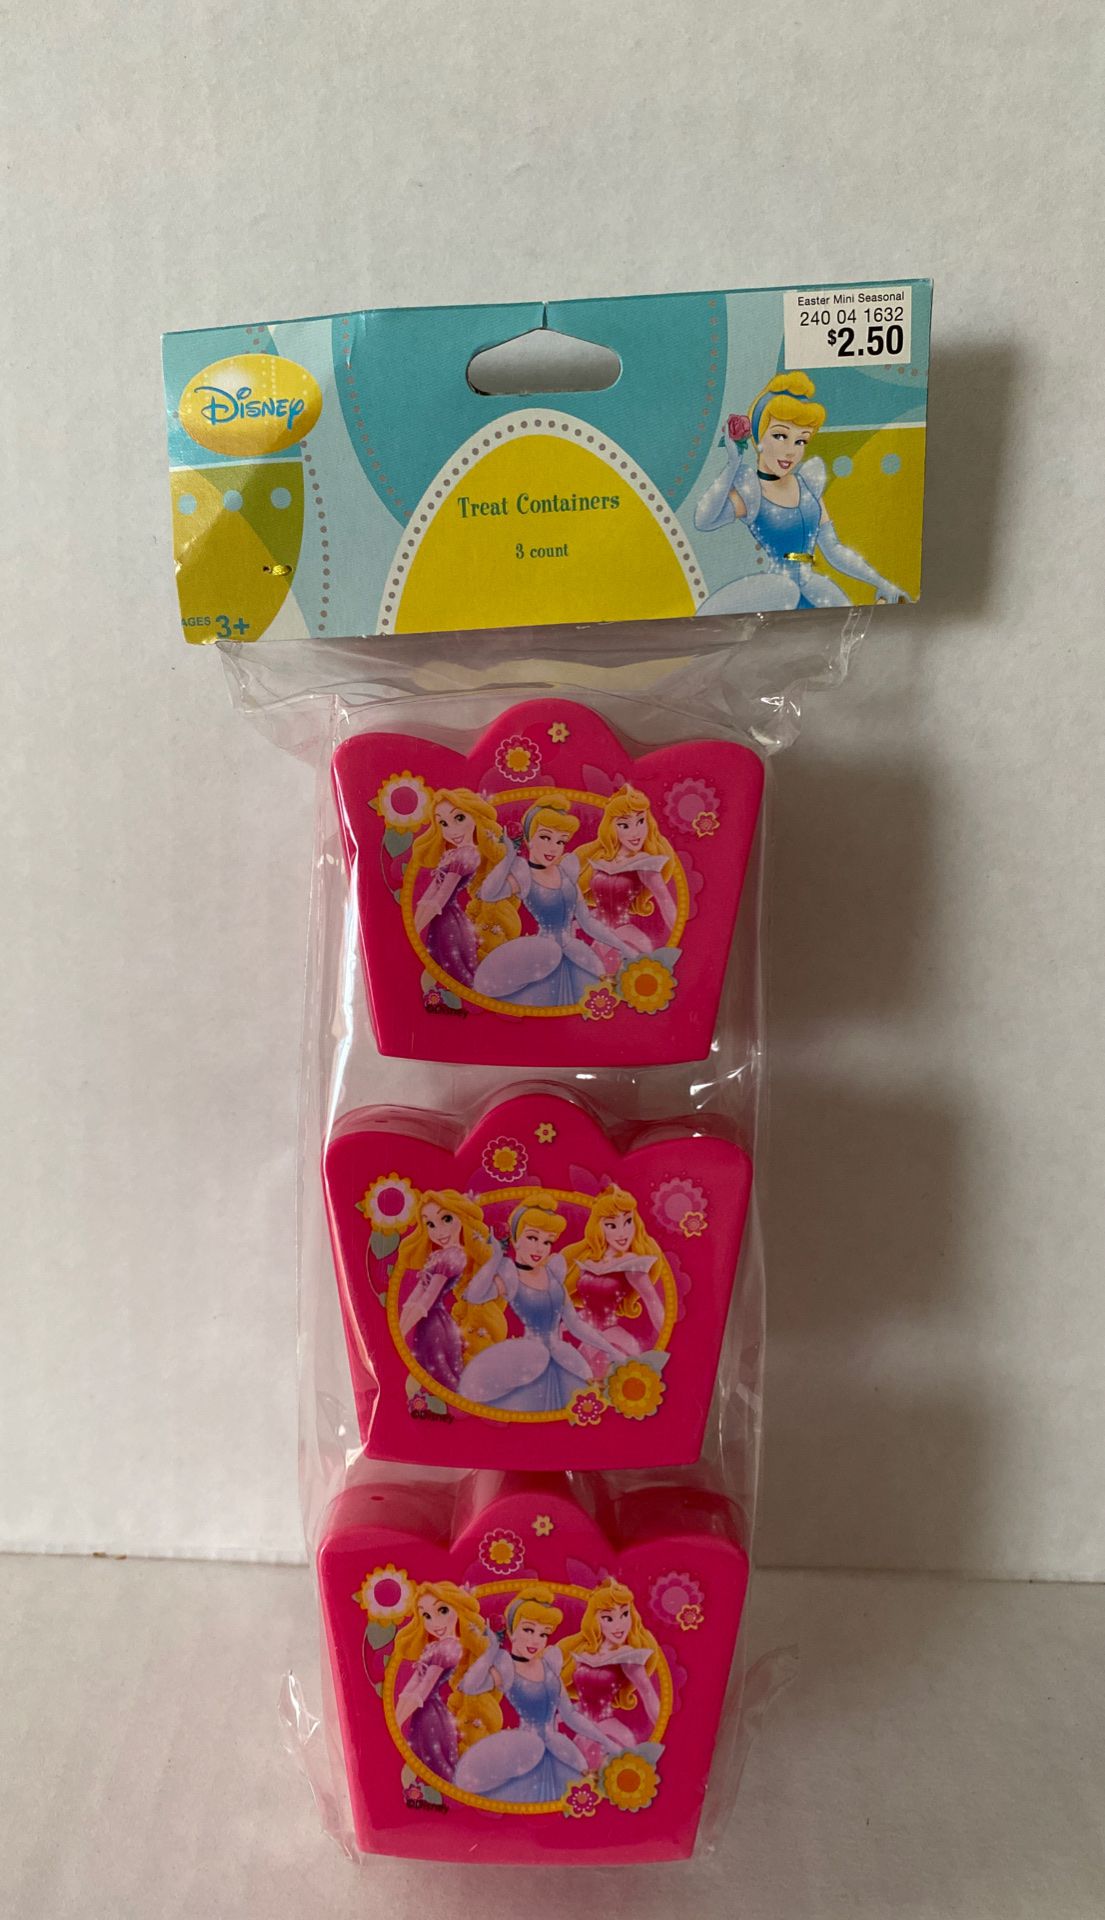 Disney Princess Easter Treat Egg Containers, Brand New in Package